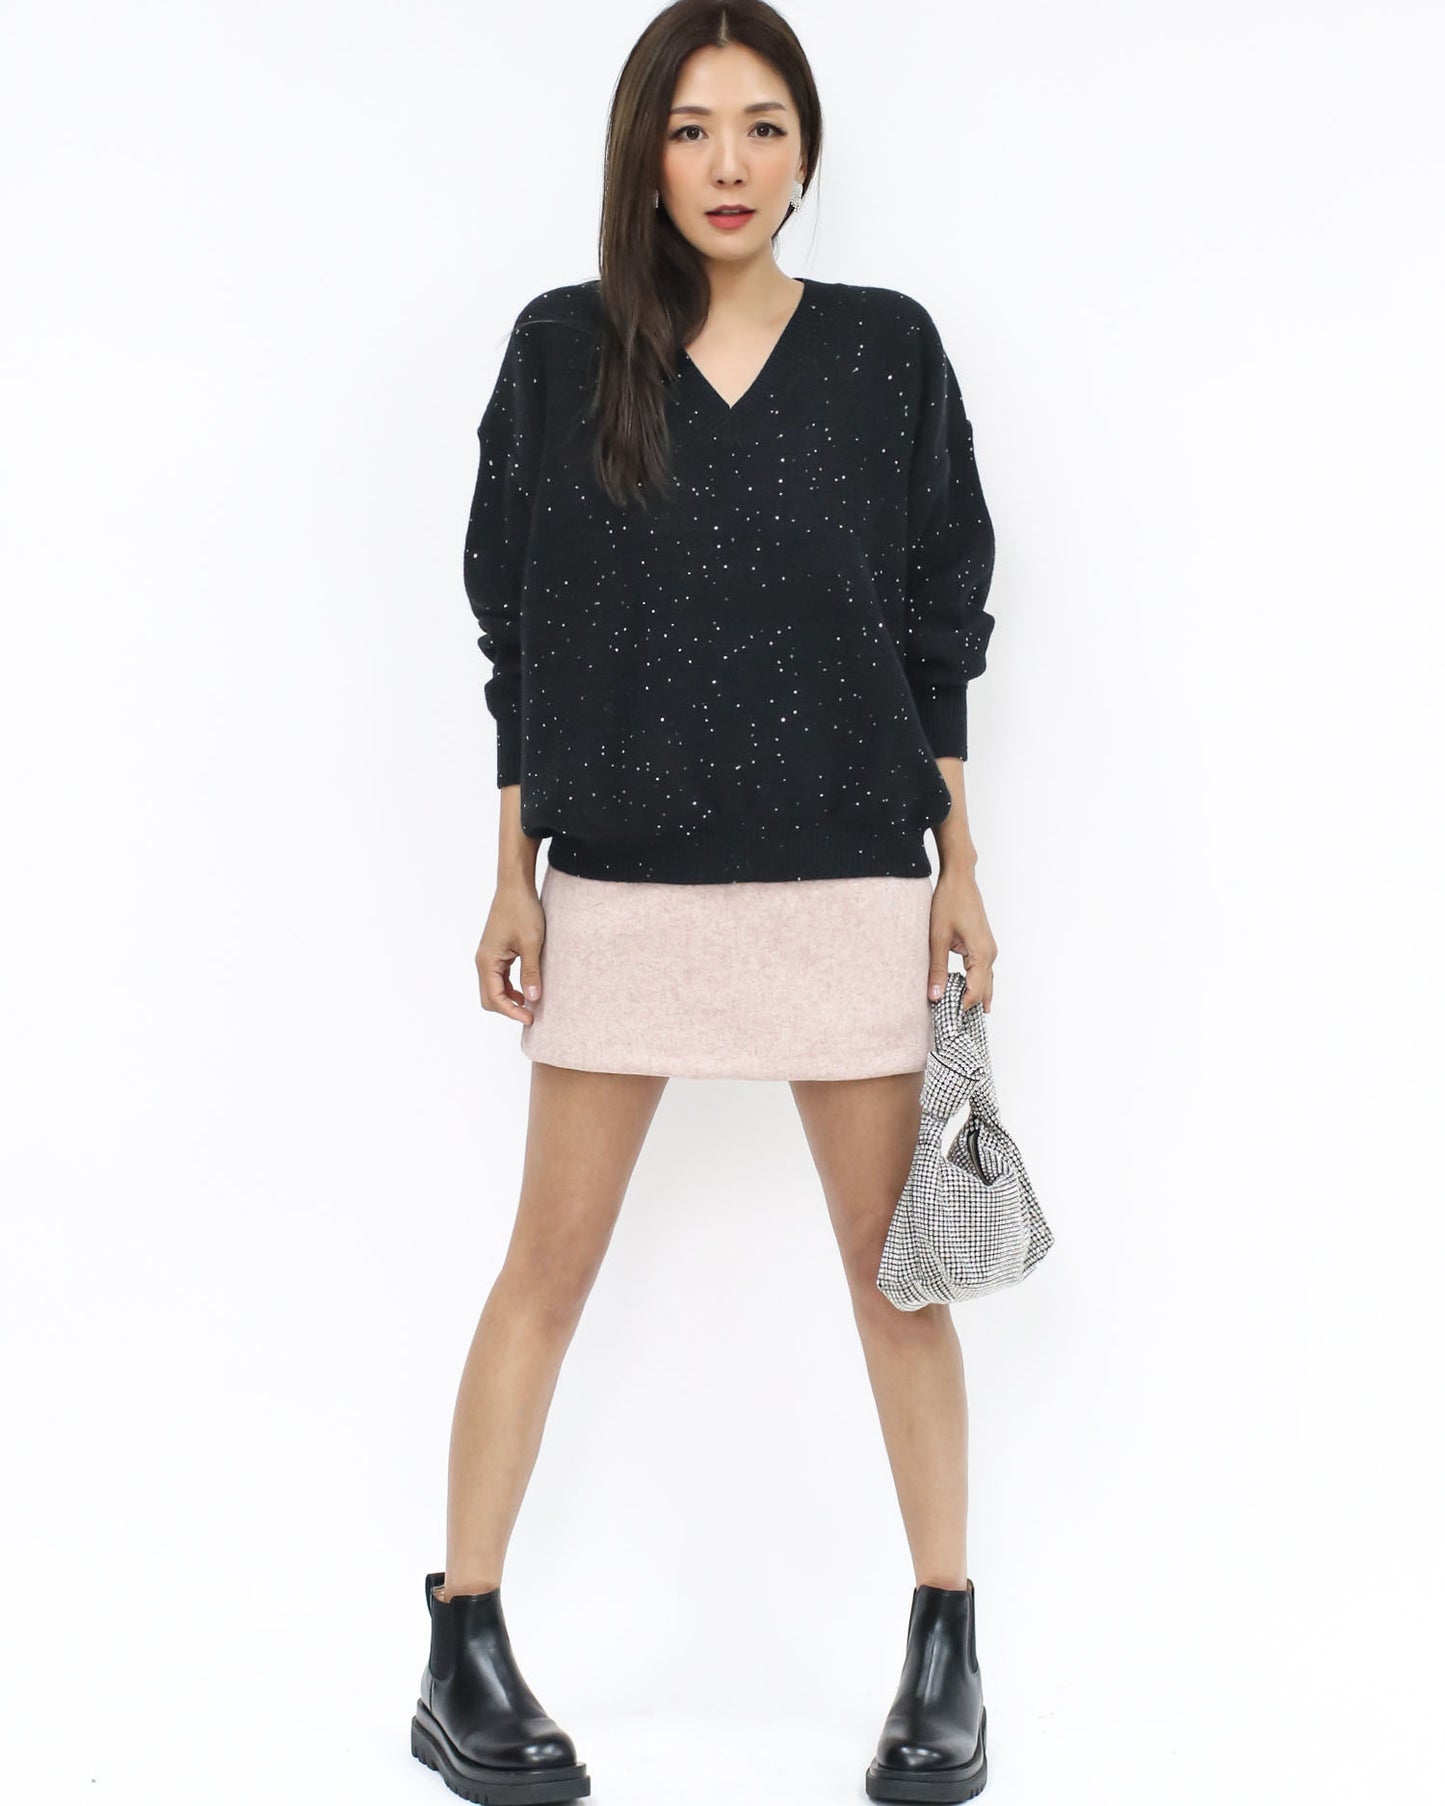 black sequins knitted top